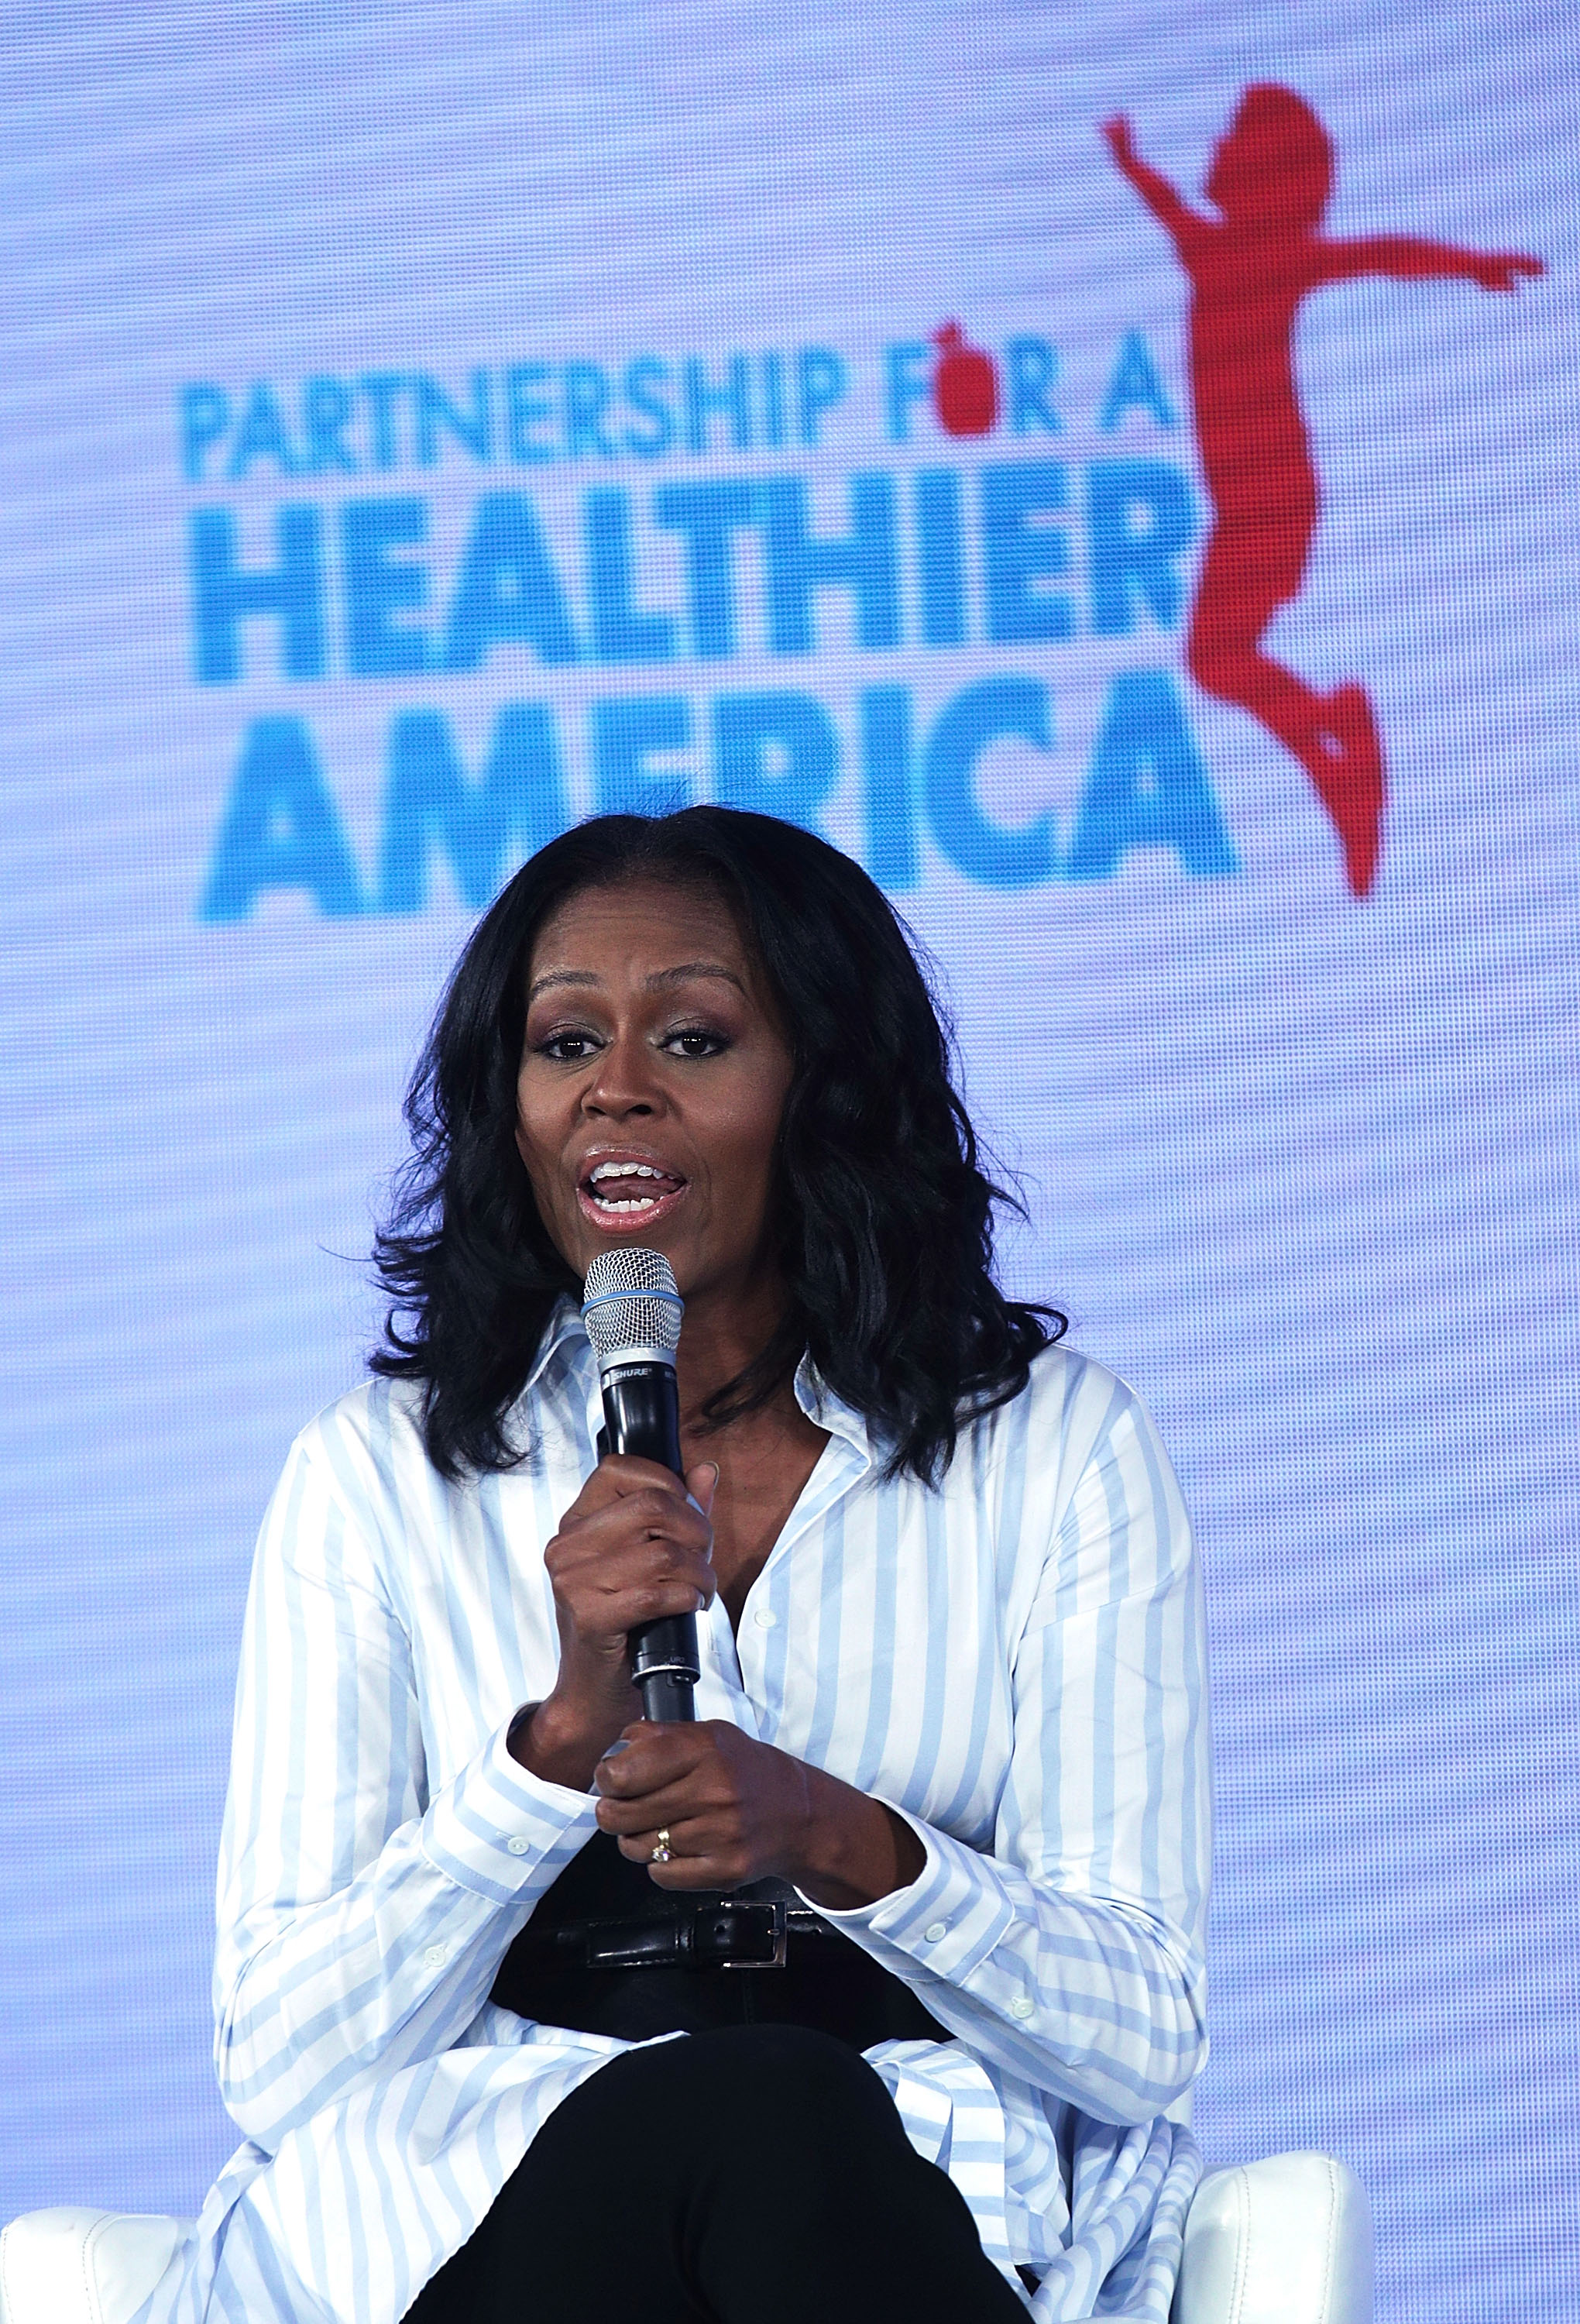 Former First Lady Michelle Obama Speaks At The Partnership for a Healthier America Summit